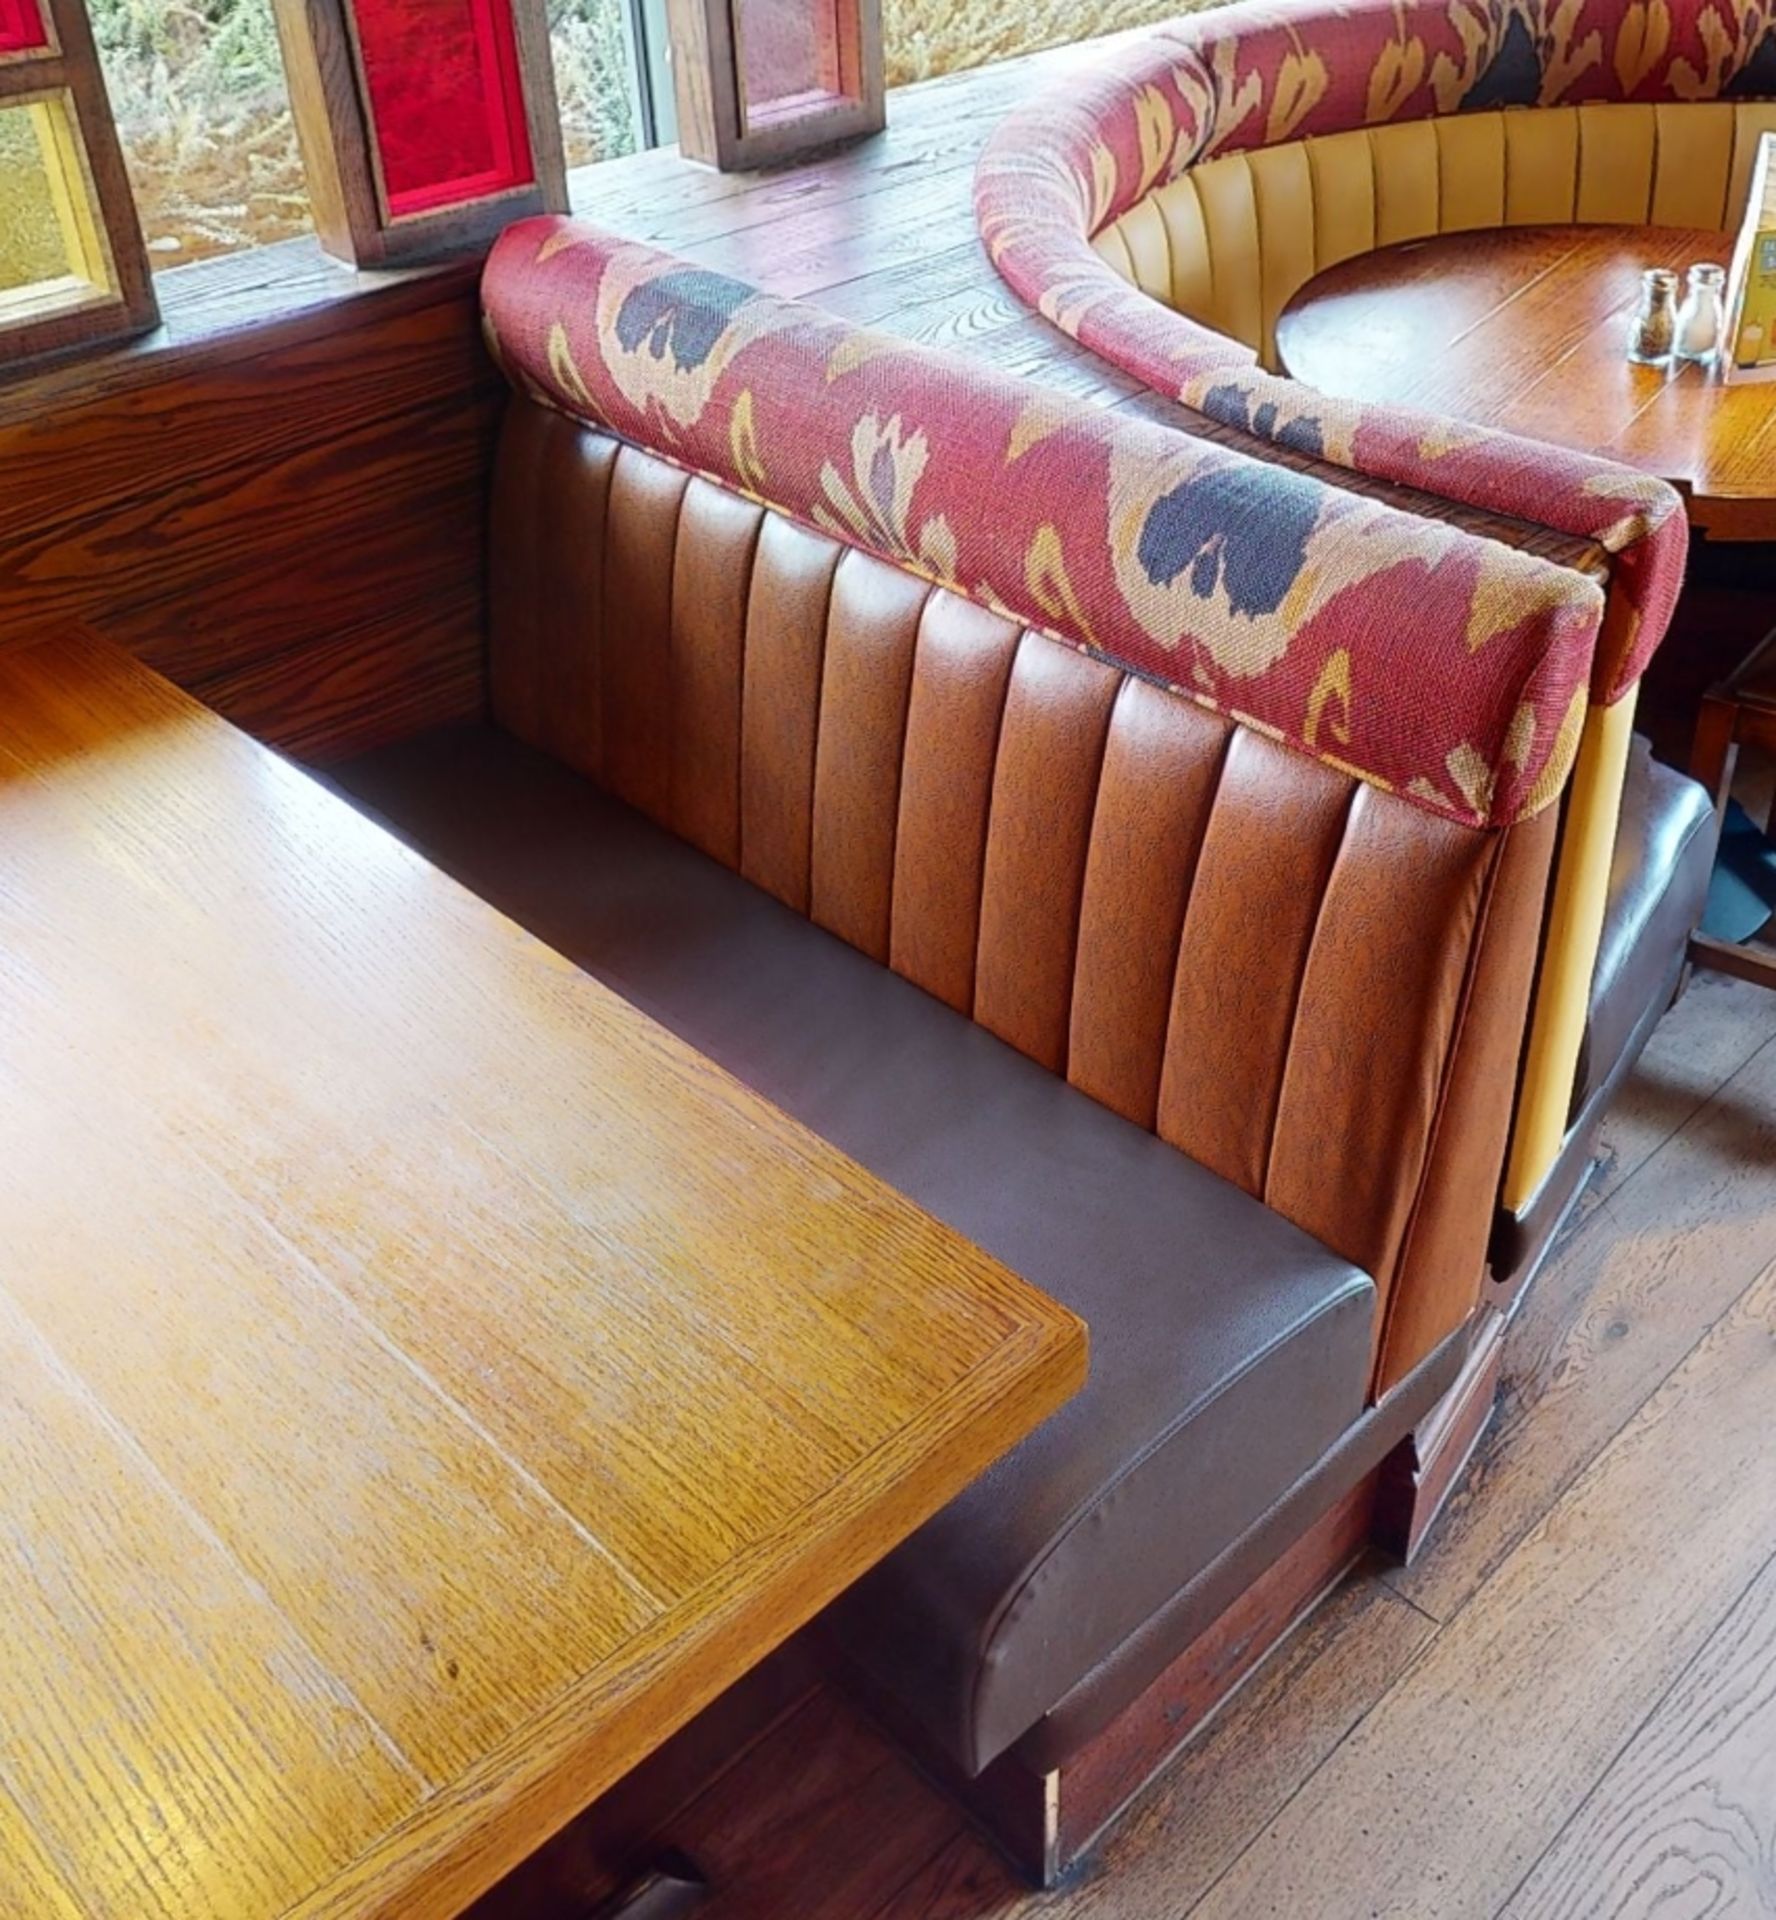 1 x Collection of Restaurant Double Seat Seating Benches - Includes 2 x End Benches and 2 x Back - Image 3 of 8